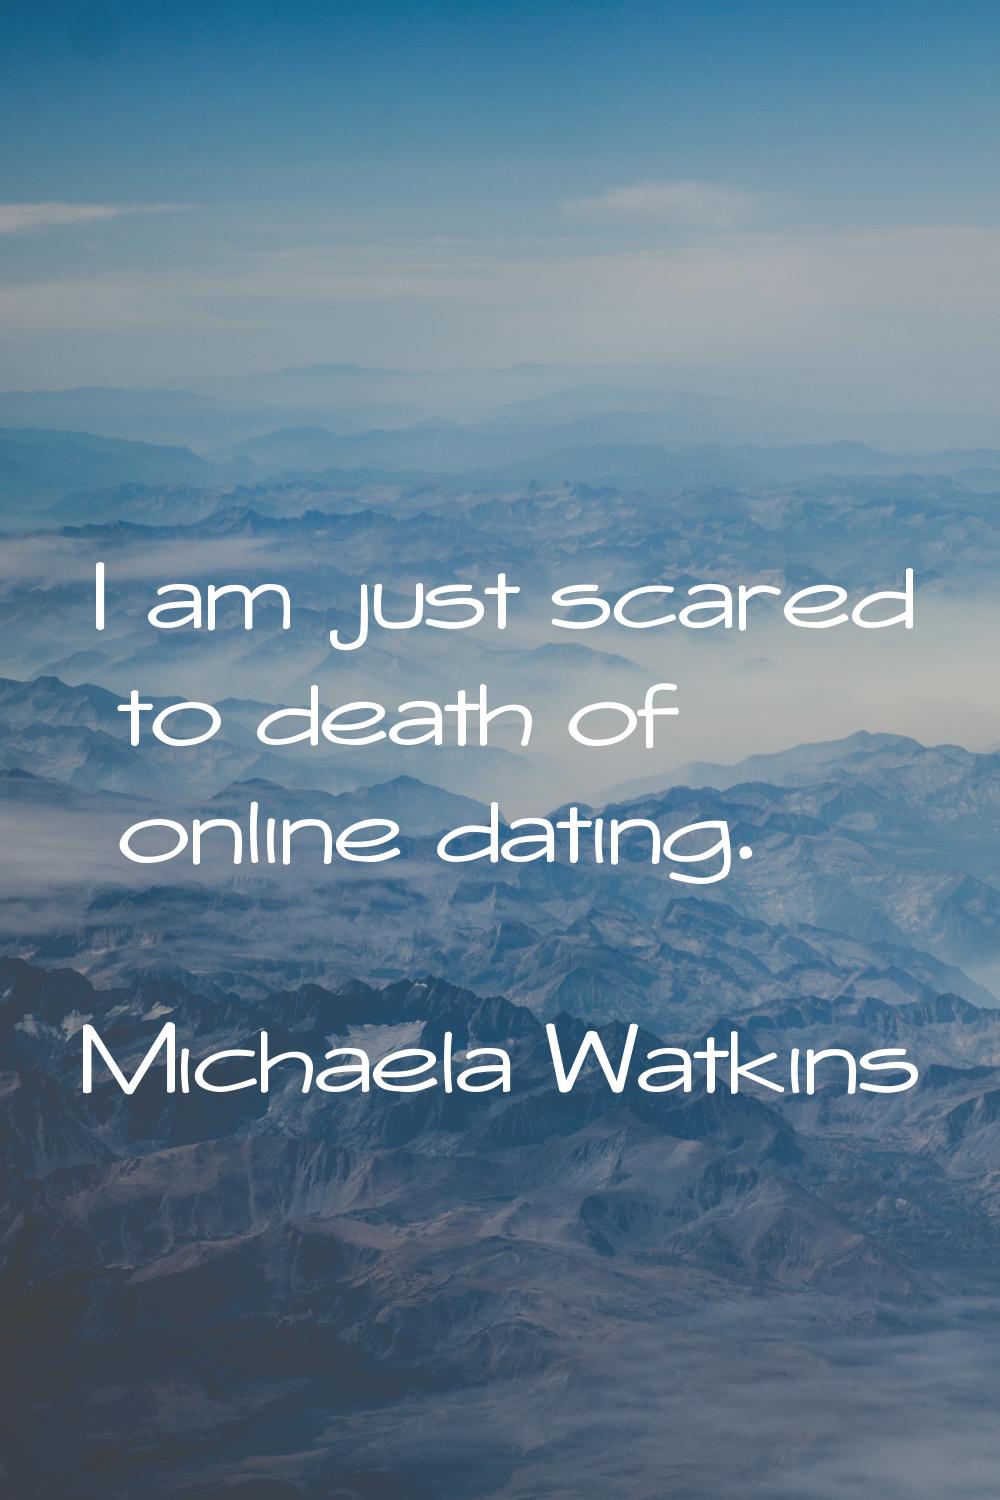 I am just scared to death of online dating.